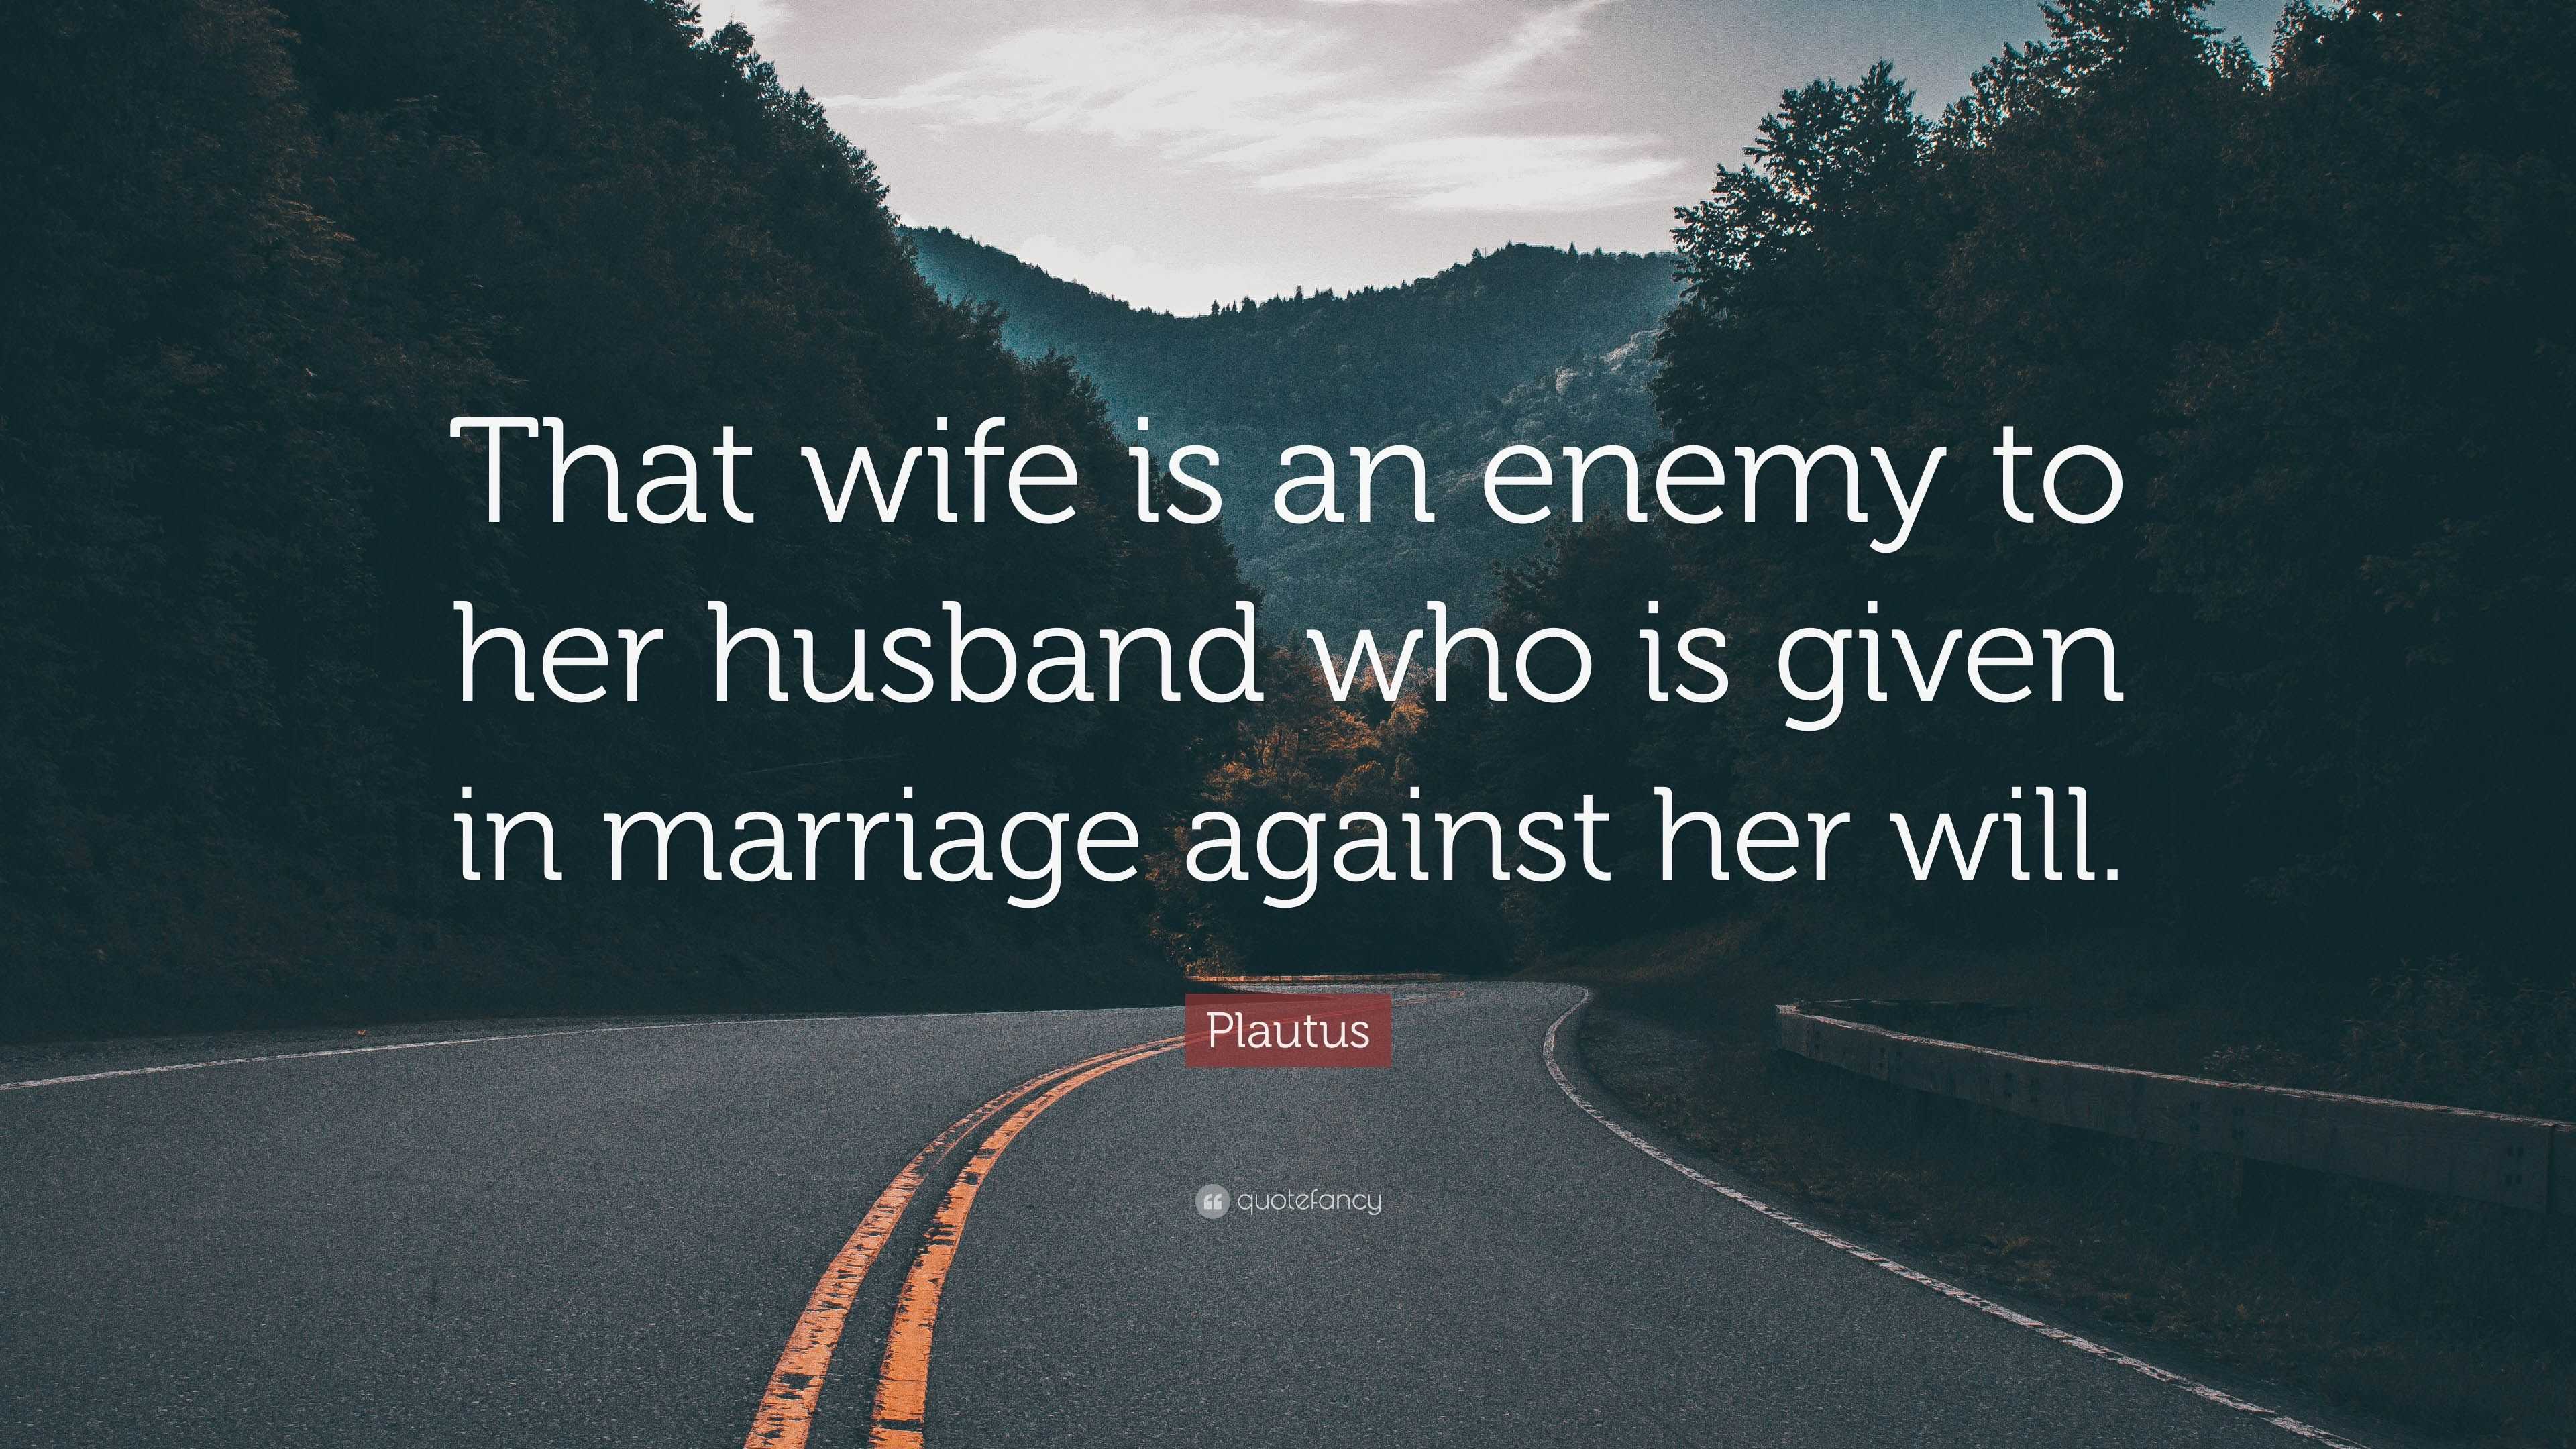 Plautus Quote: "That wife is an enemy to her husband who ...